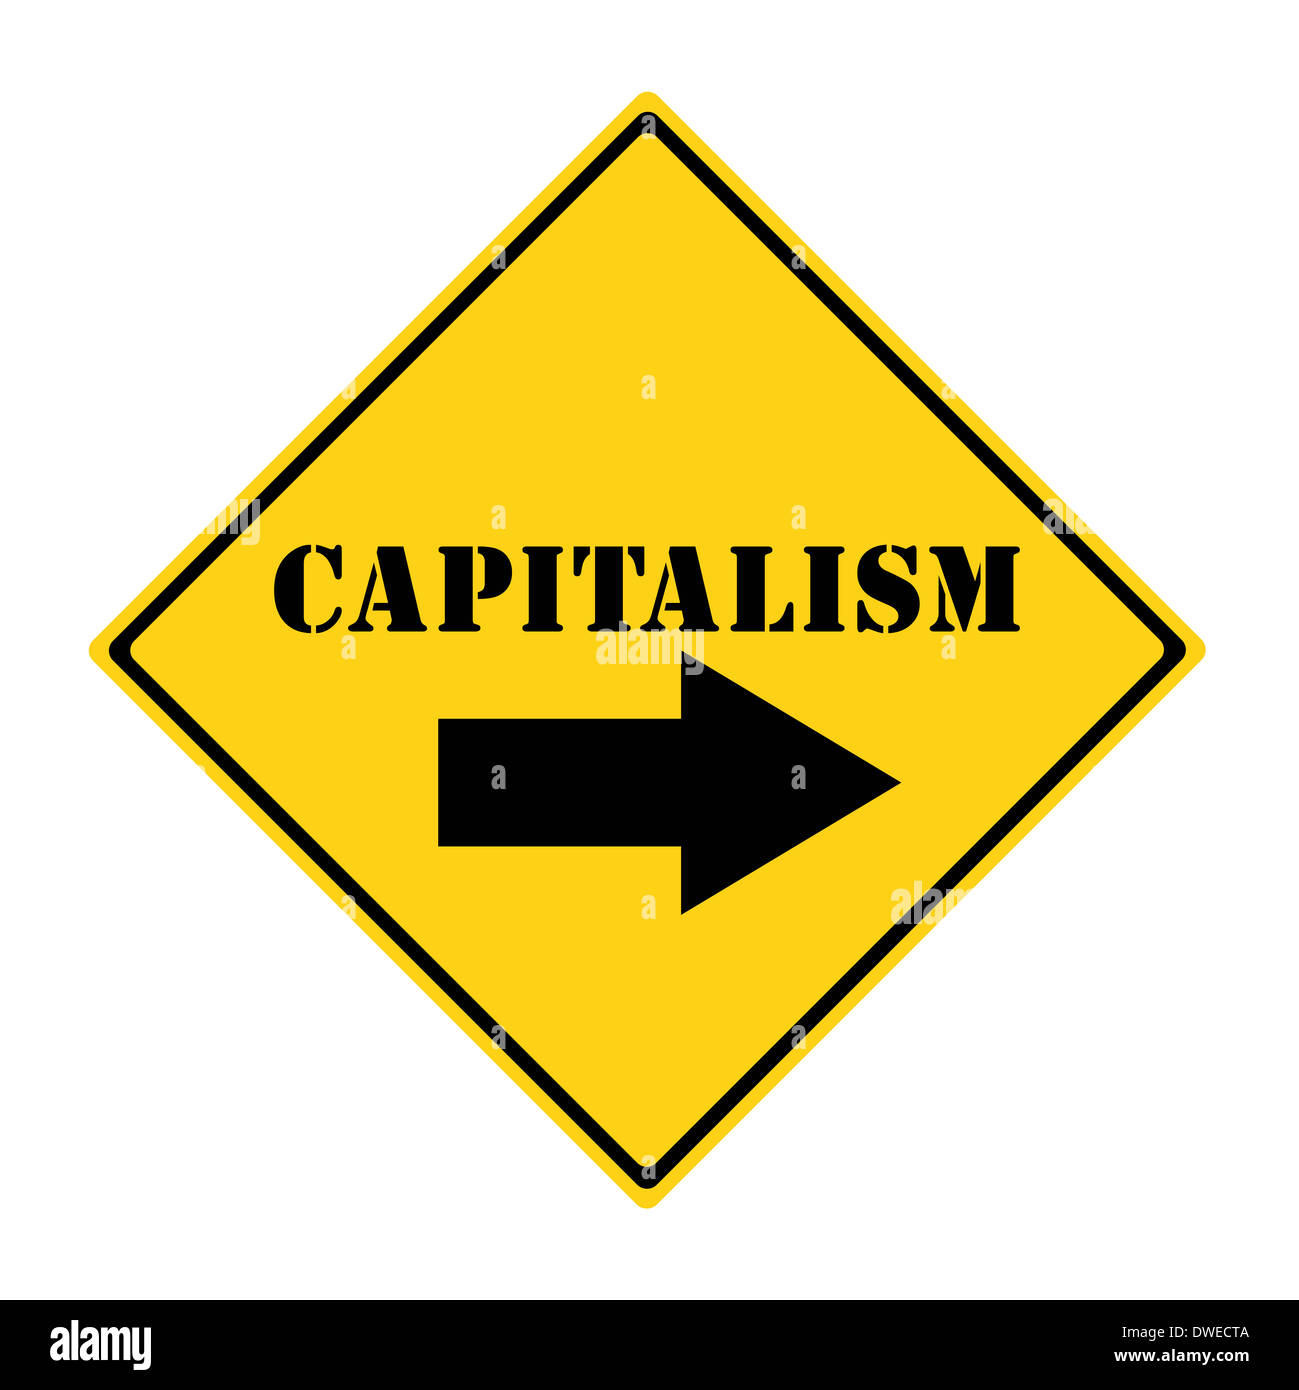 A yellow and black diamond shaped road sign with the word CAPITALISM and an arrow pointing the way making a great concept. Stock Photo